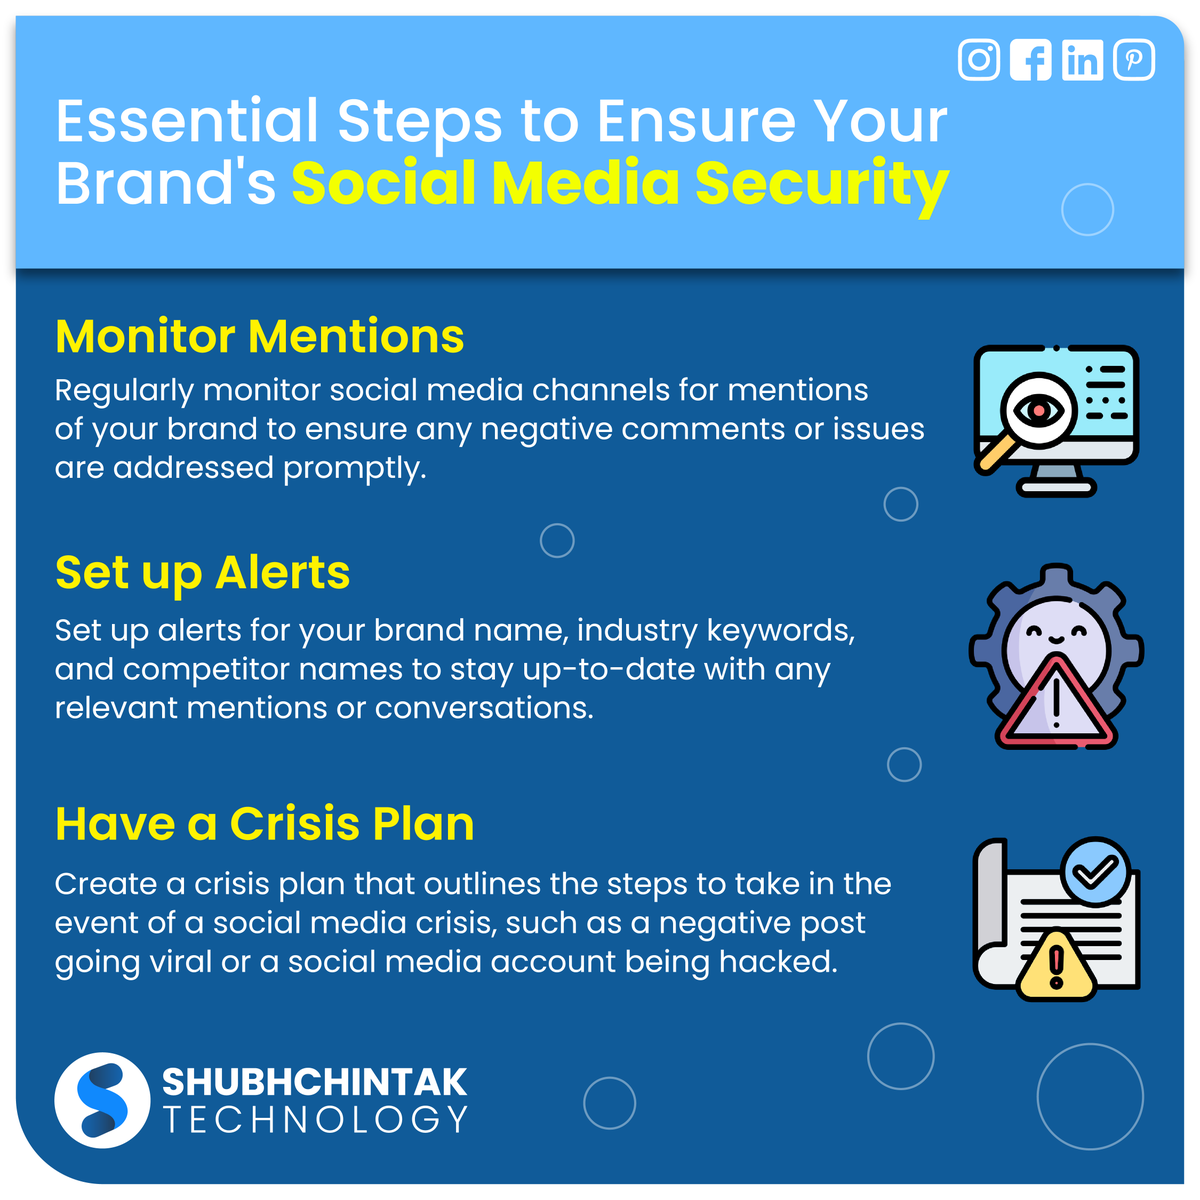 Protecting your social media accounts is not just about safeguarding your personal information 👤 ; it's about preserving your online reputation and ensuring your #digitalpresence remains secure ✅. #socialmediasecurity #onlinebusiness #cybersecurity #onlinereputation #startup